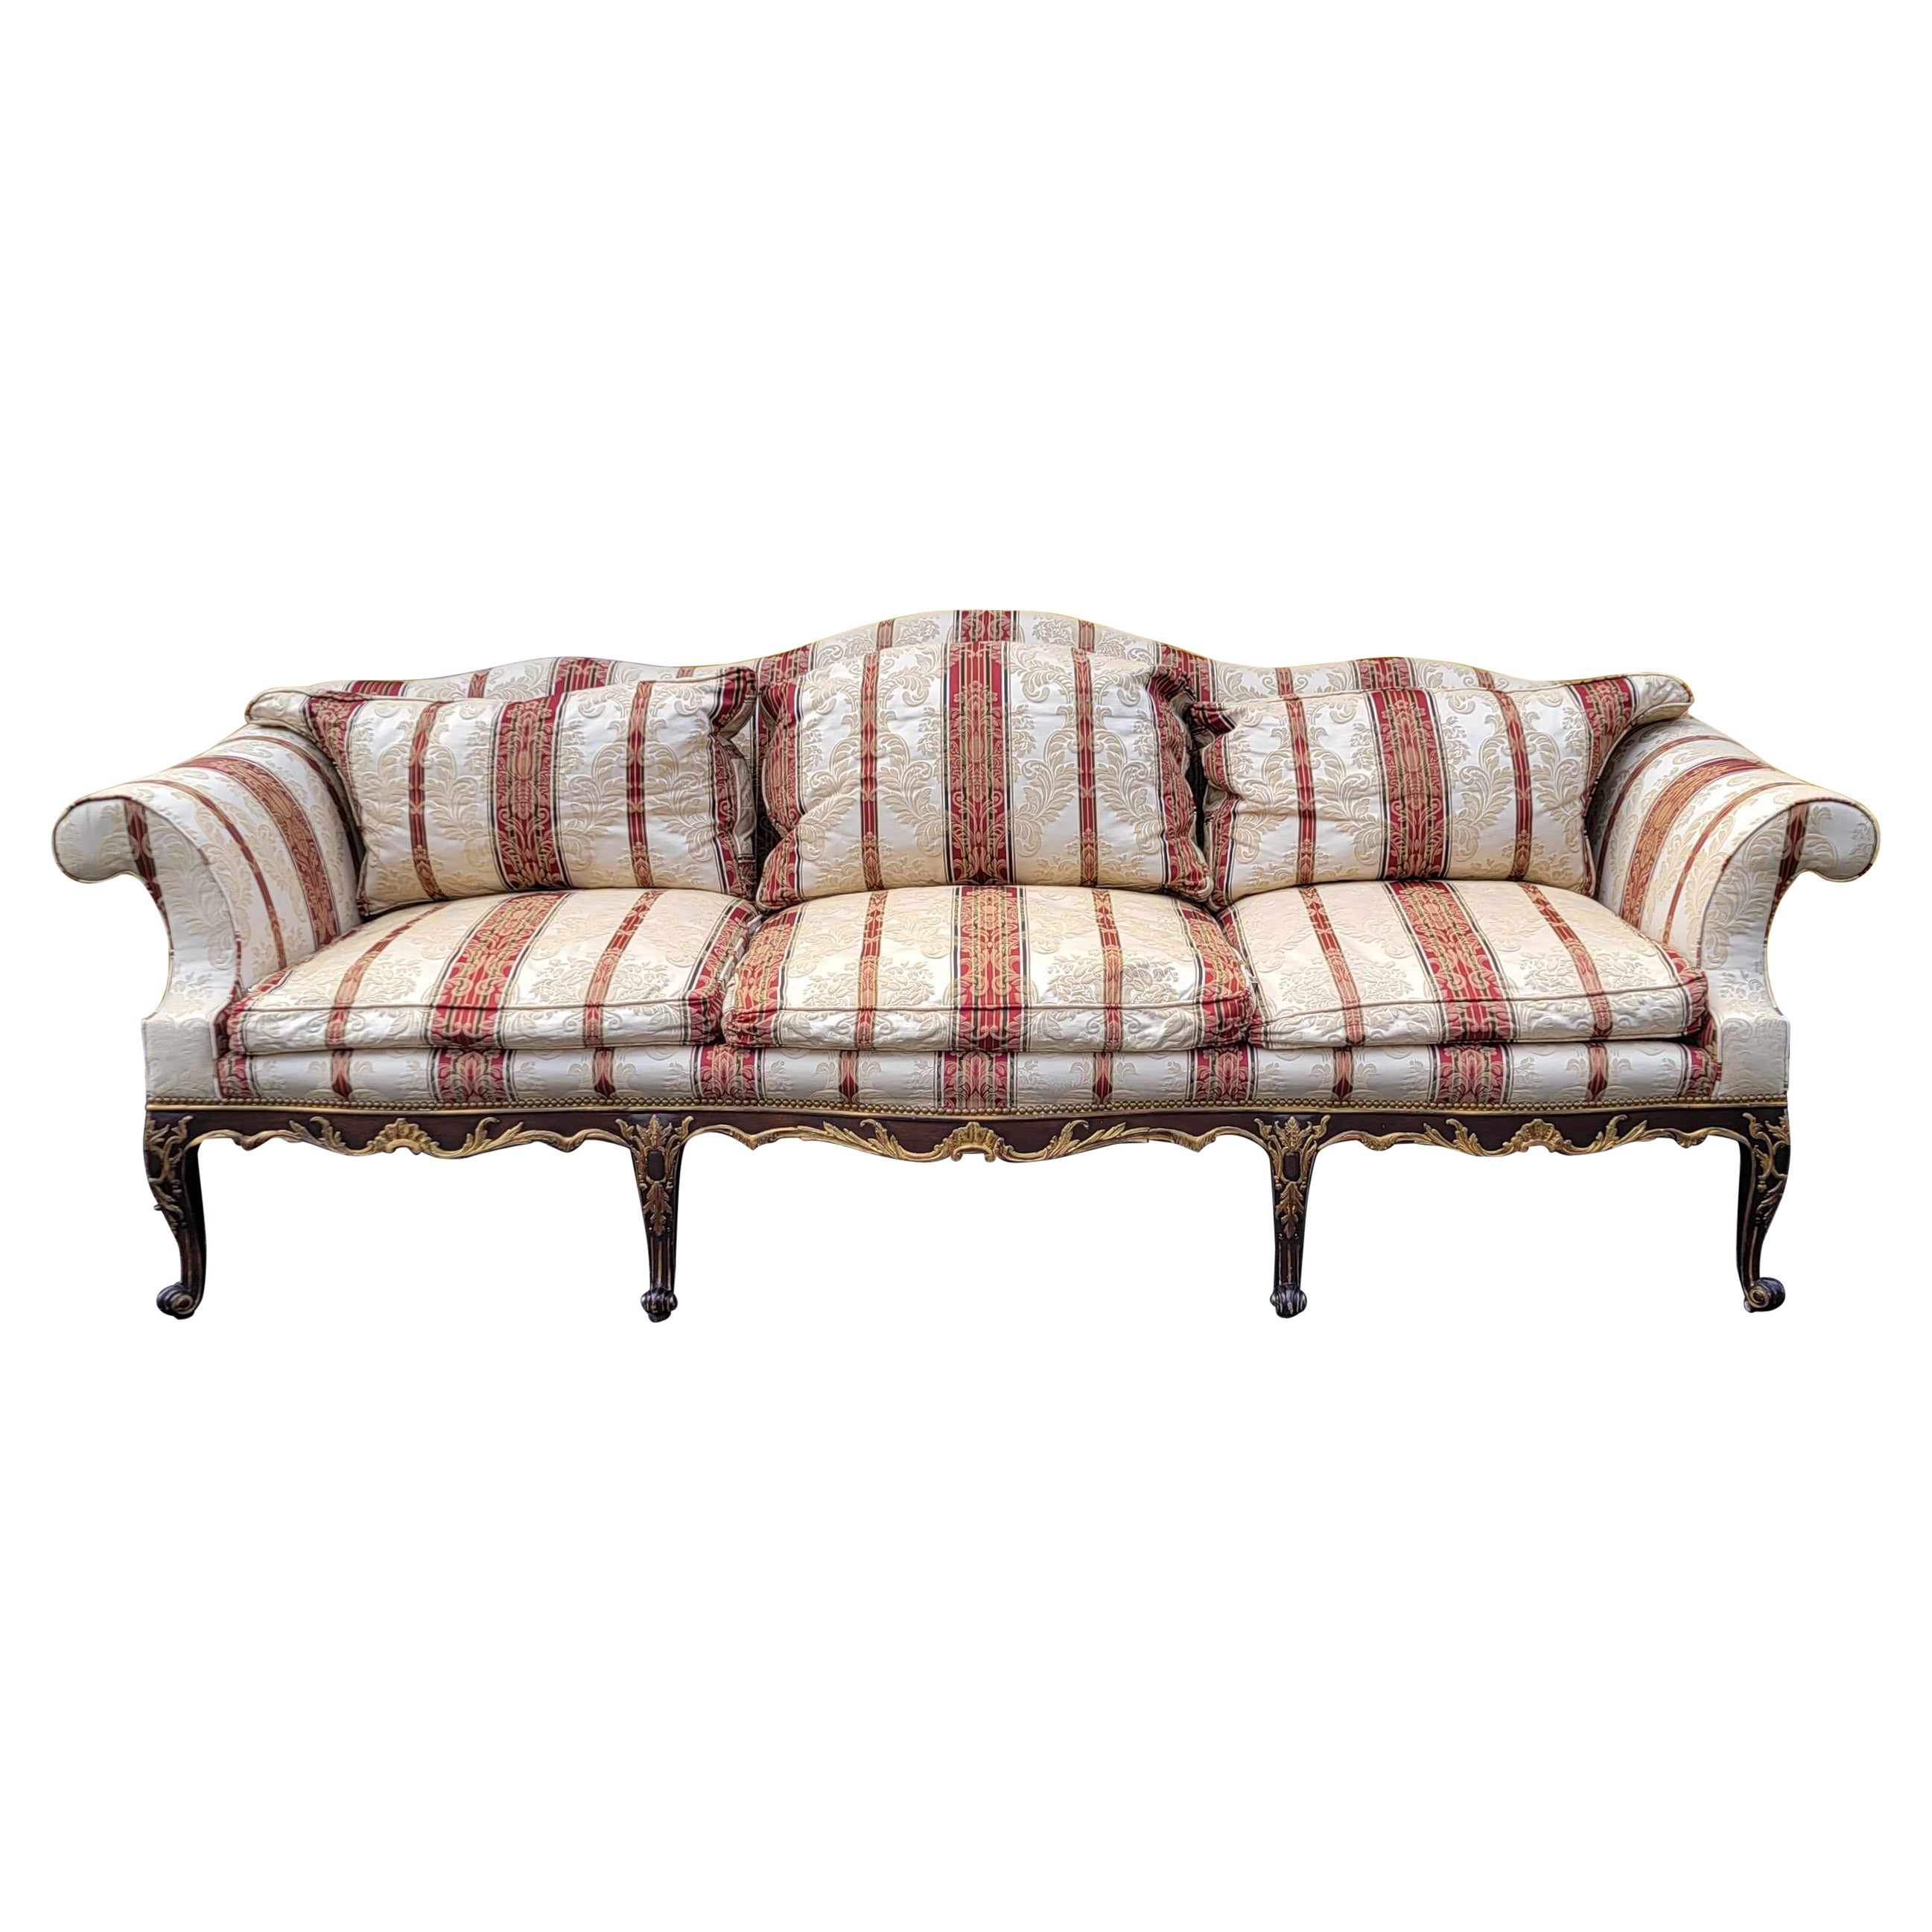 Late 20th-C. French Louis XVI Style Sofa By EJ Victor In Stripe Damask For Sale